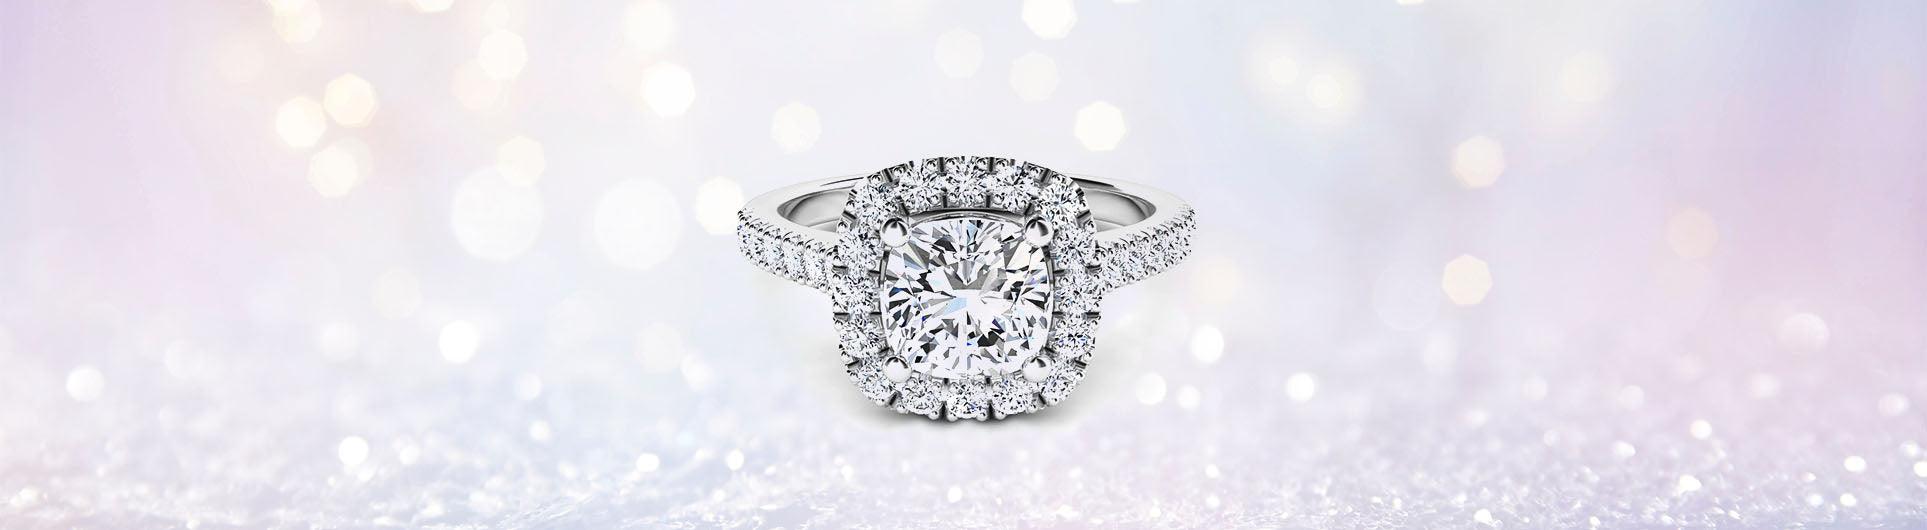 For the Perfect Diamond Engagement Ring - Monroe Yorke Diamonds - Monroe Yorke Diamonds